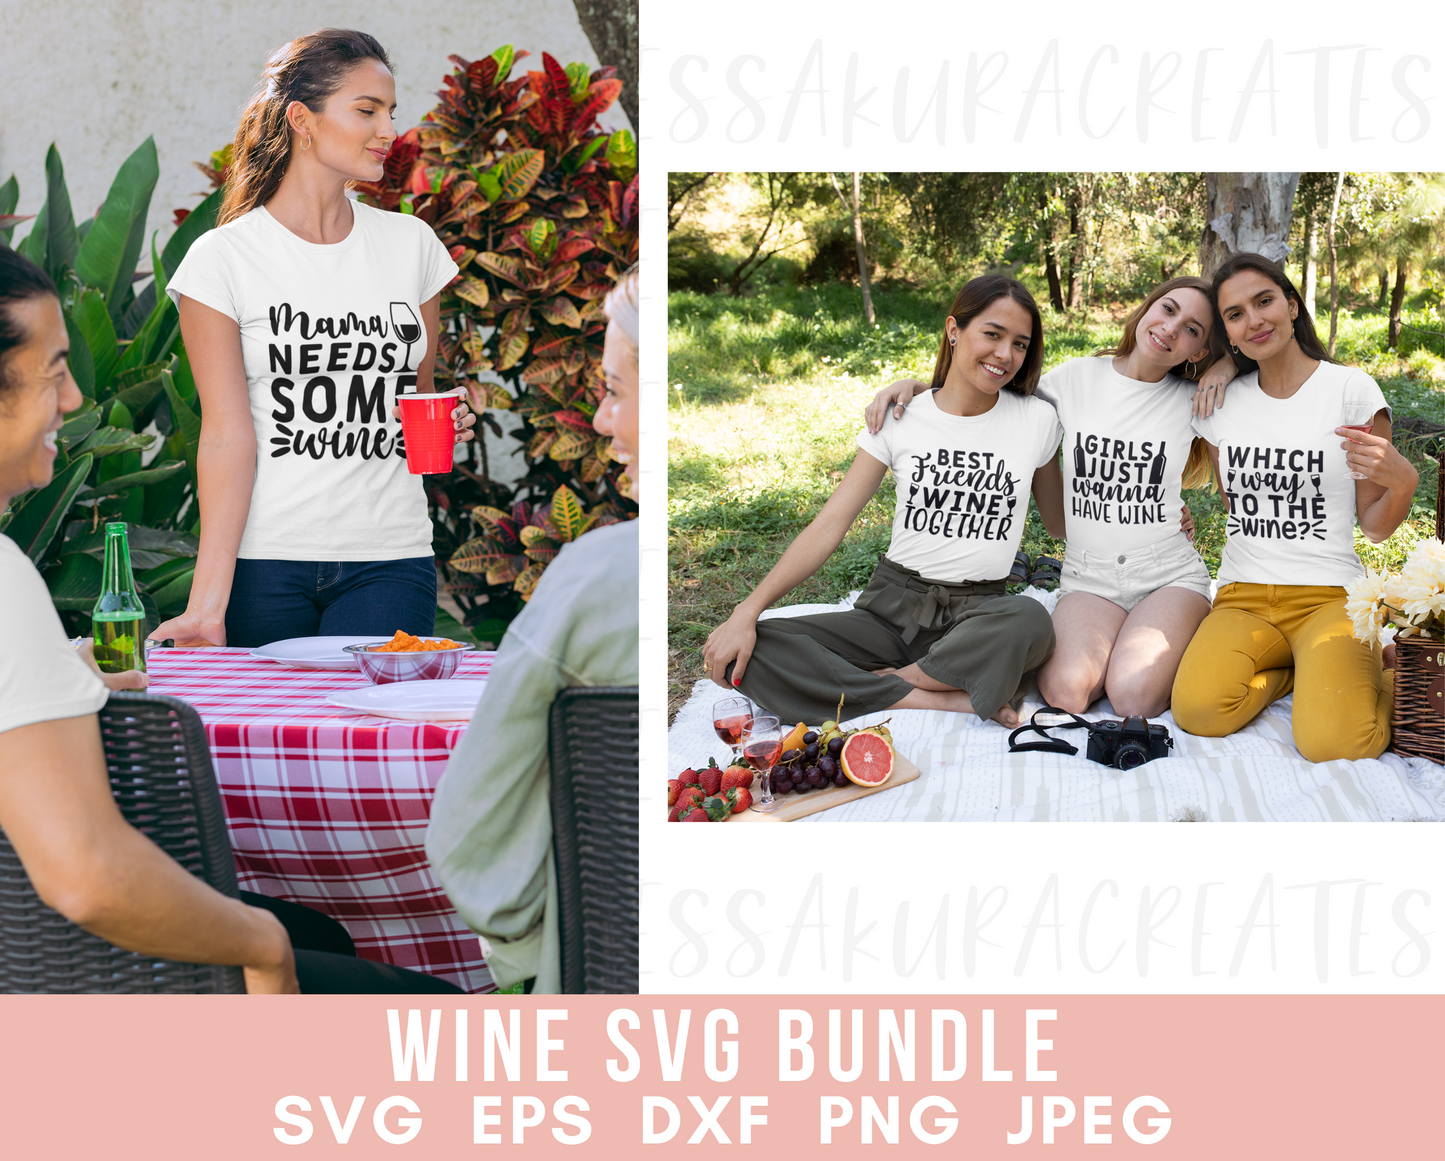 Wine Quotes SVG Bundle Wine svg drinking svg wine glass svg funny quotes wine sassy quotes wine sayings alcohol quotes svg files for cricut